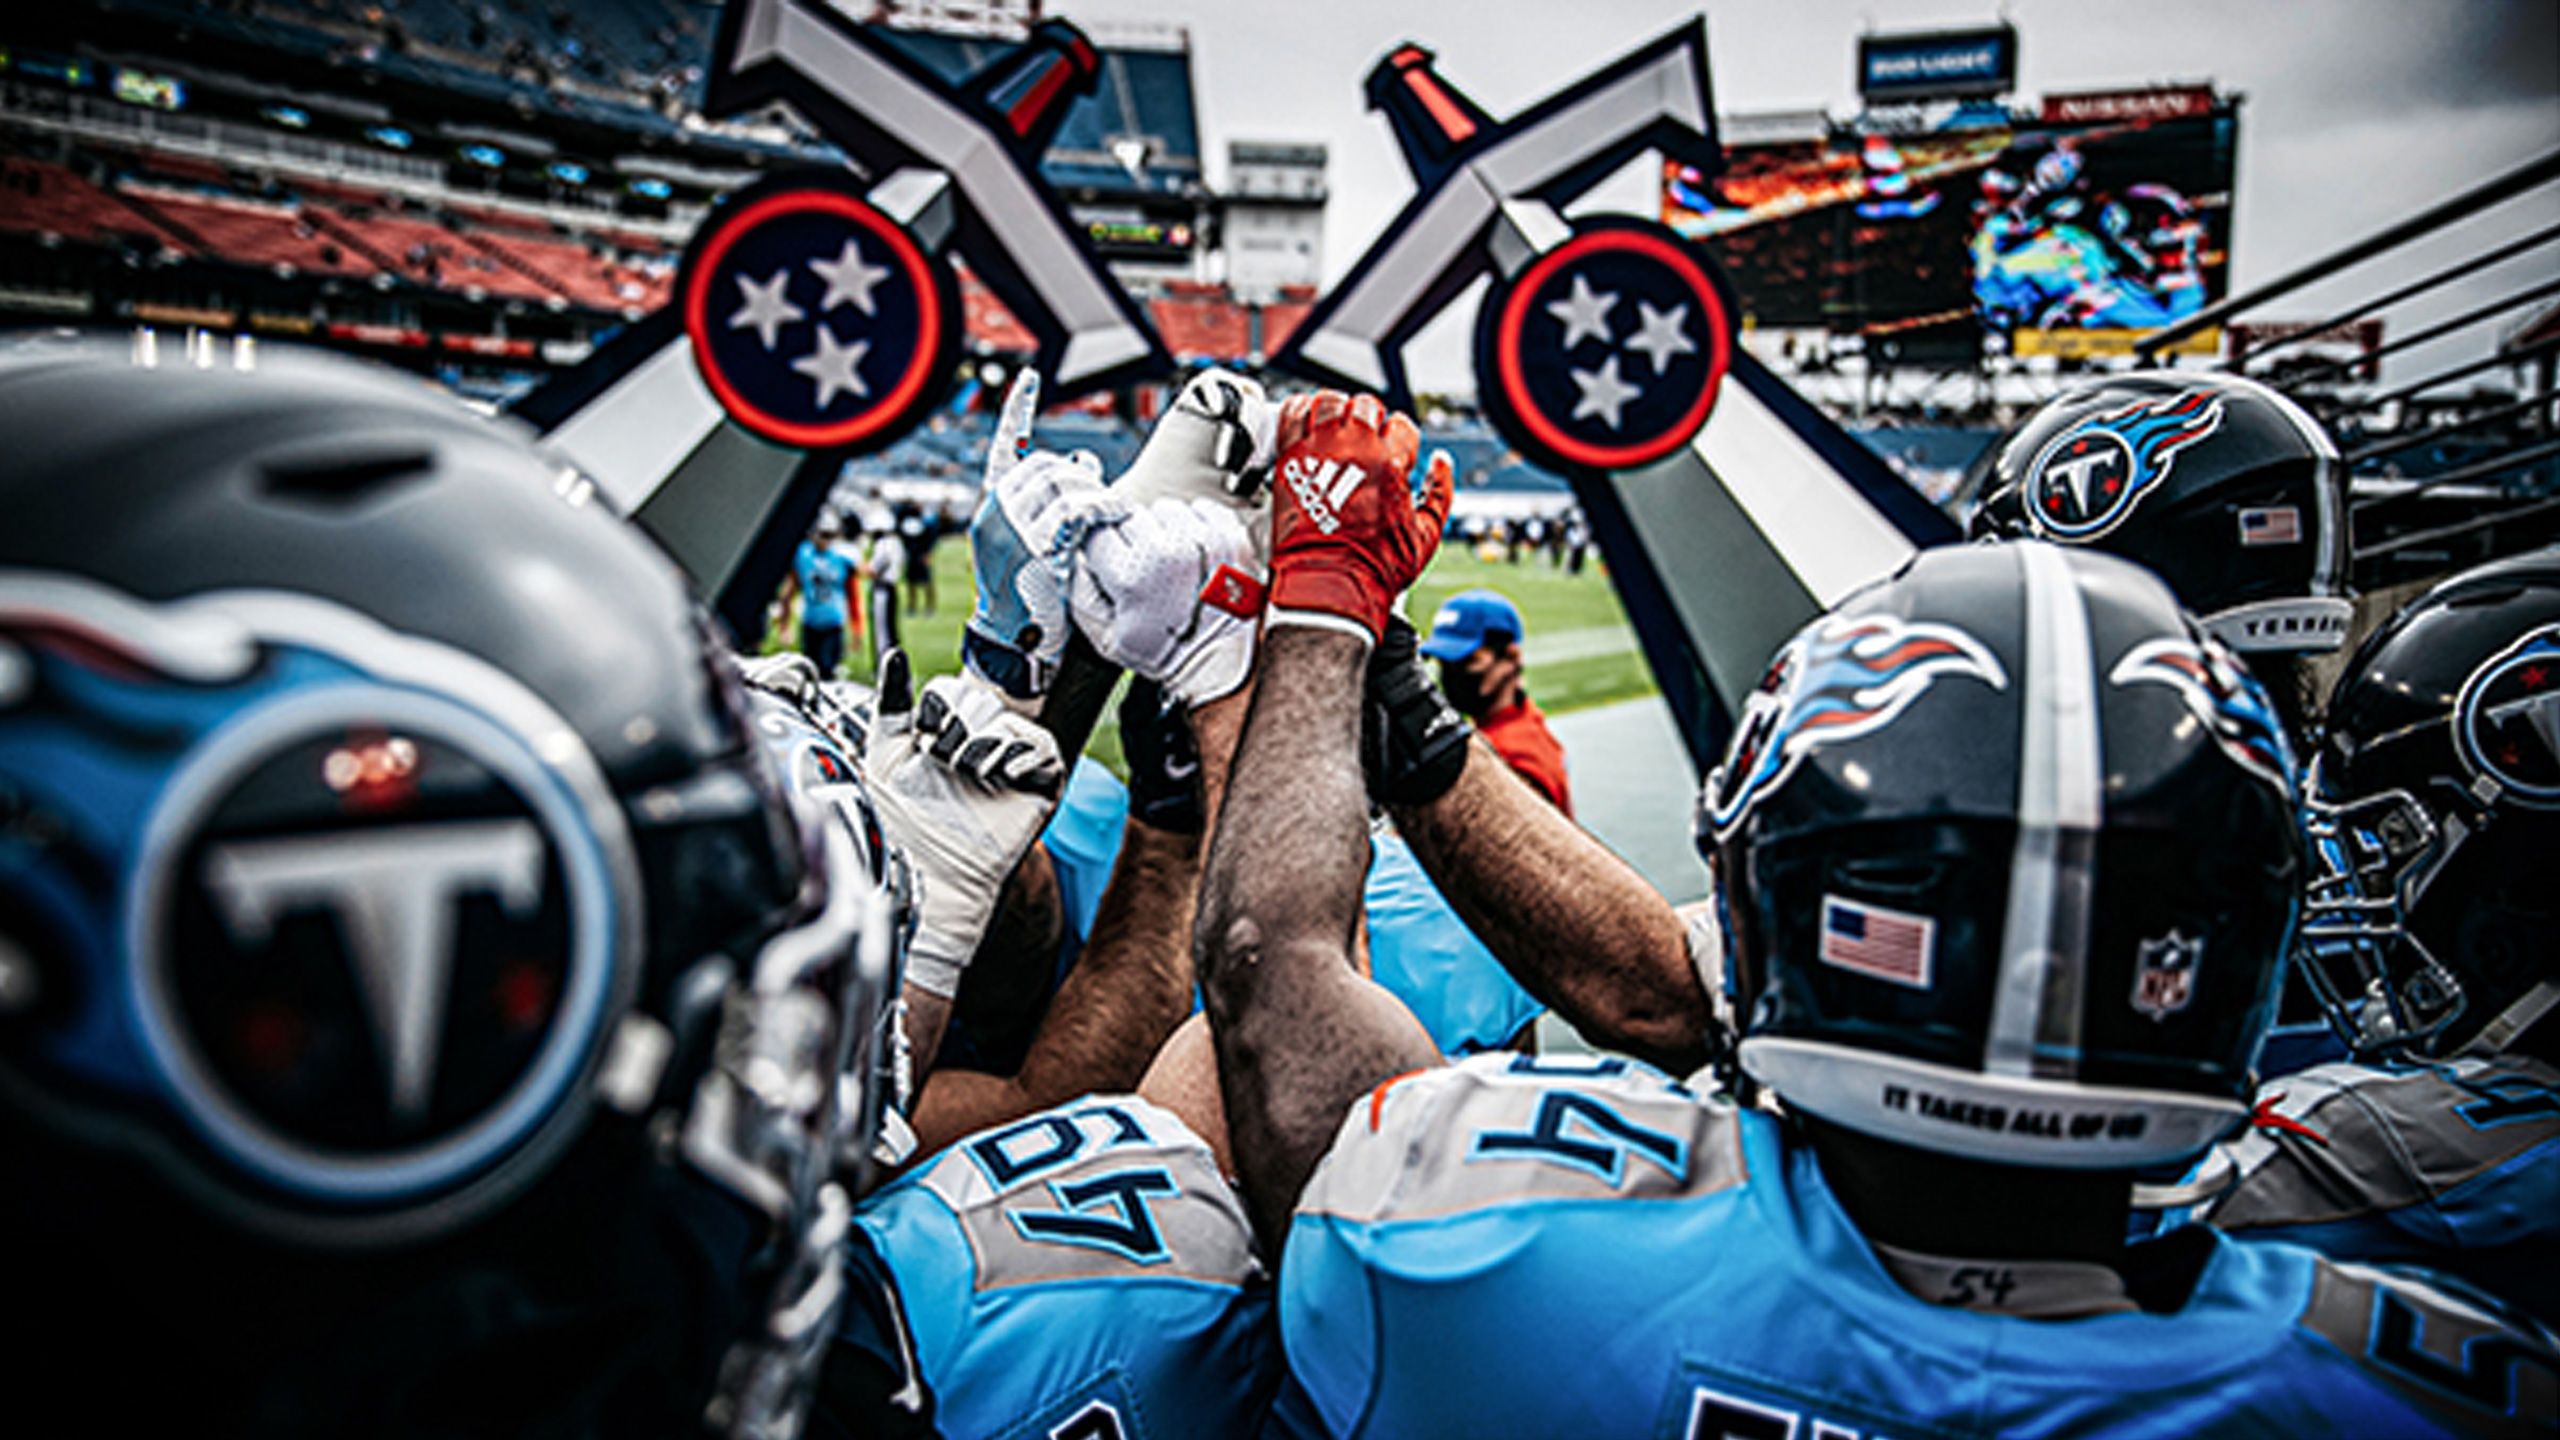 Tennessee Titans Group Tickets and Hospitality Packages